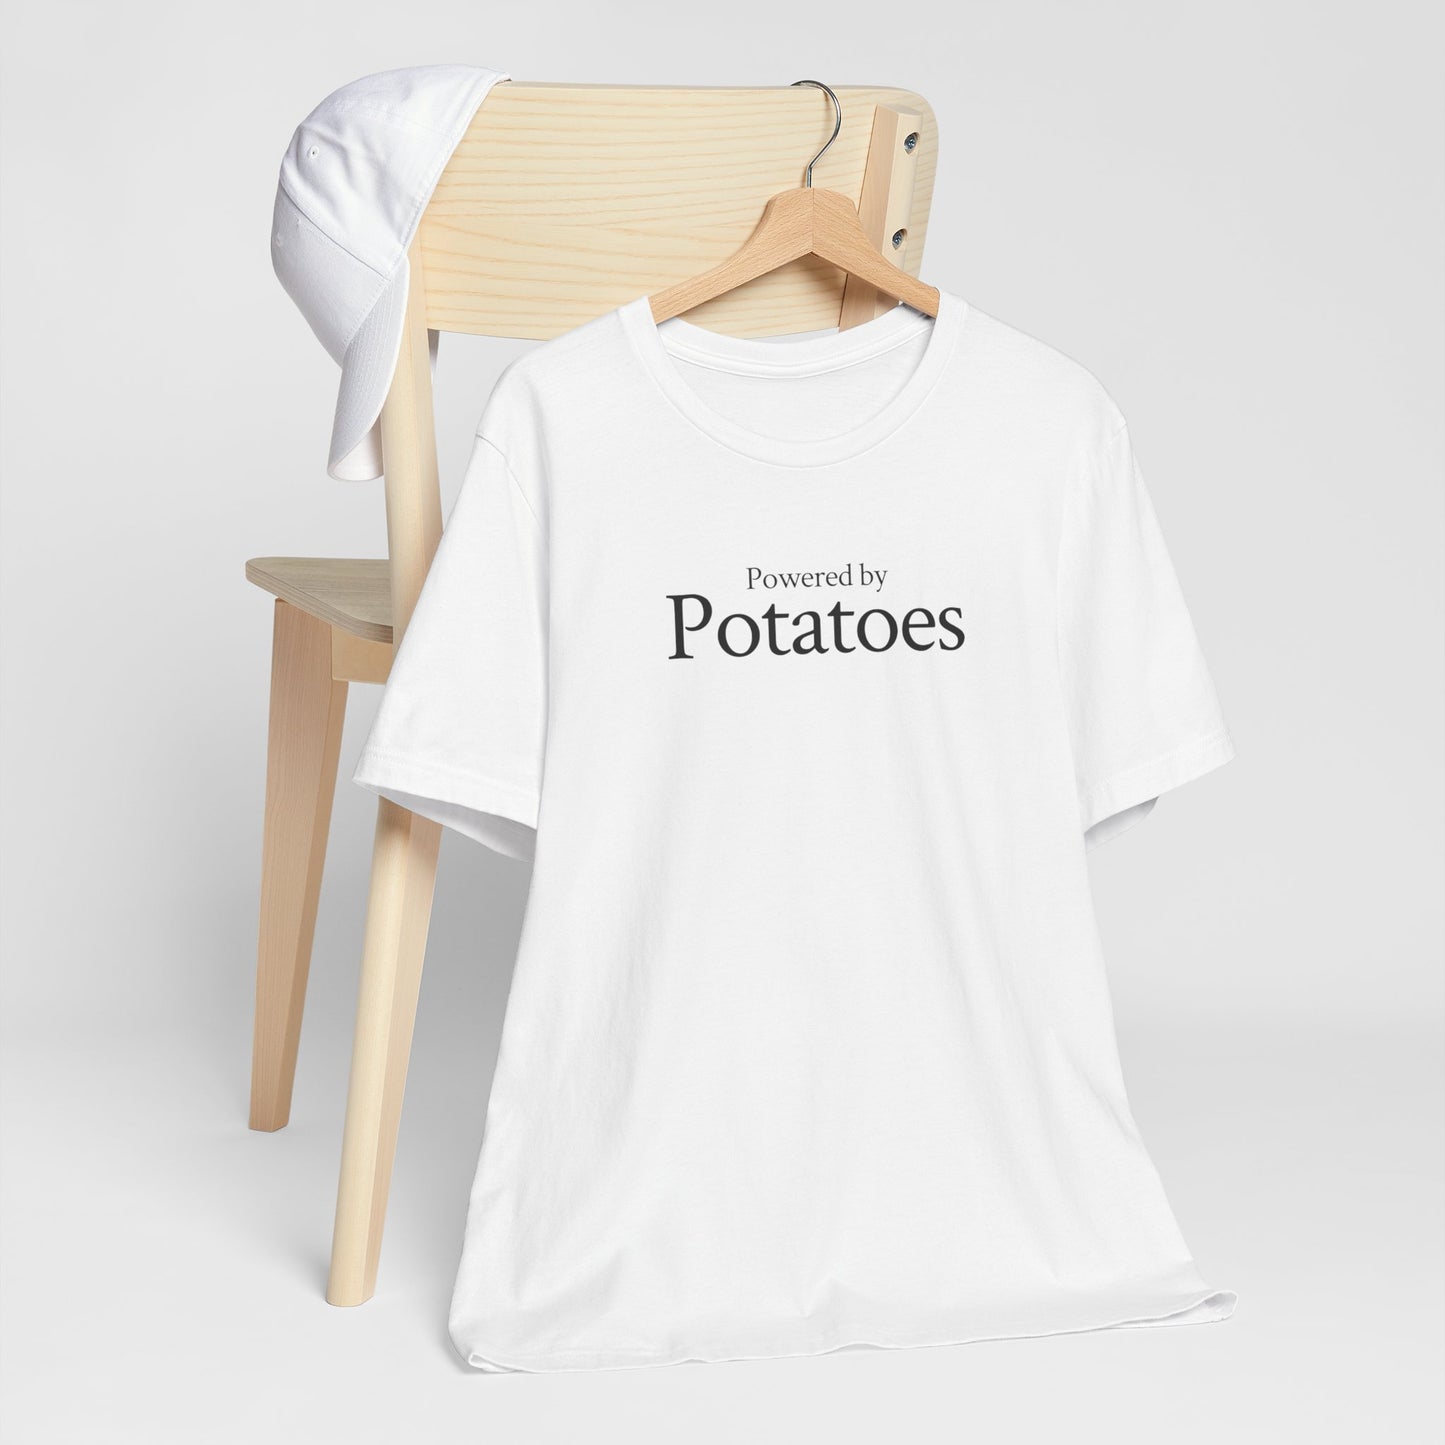 Powered by Potatoes